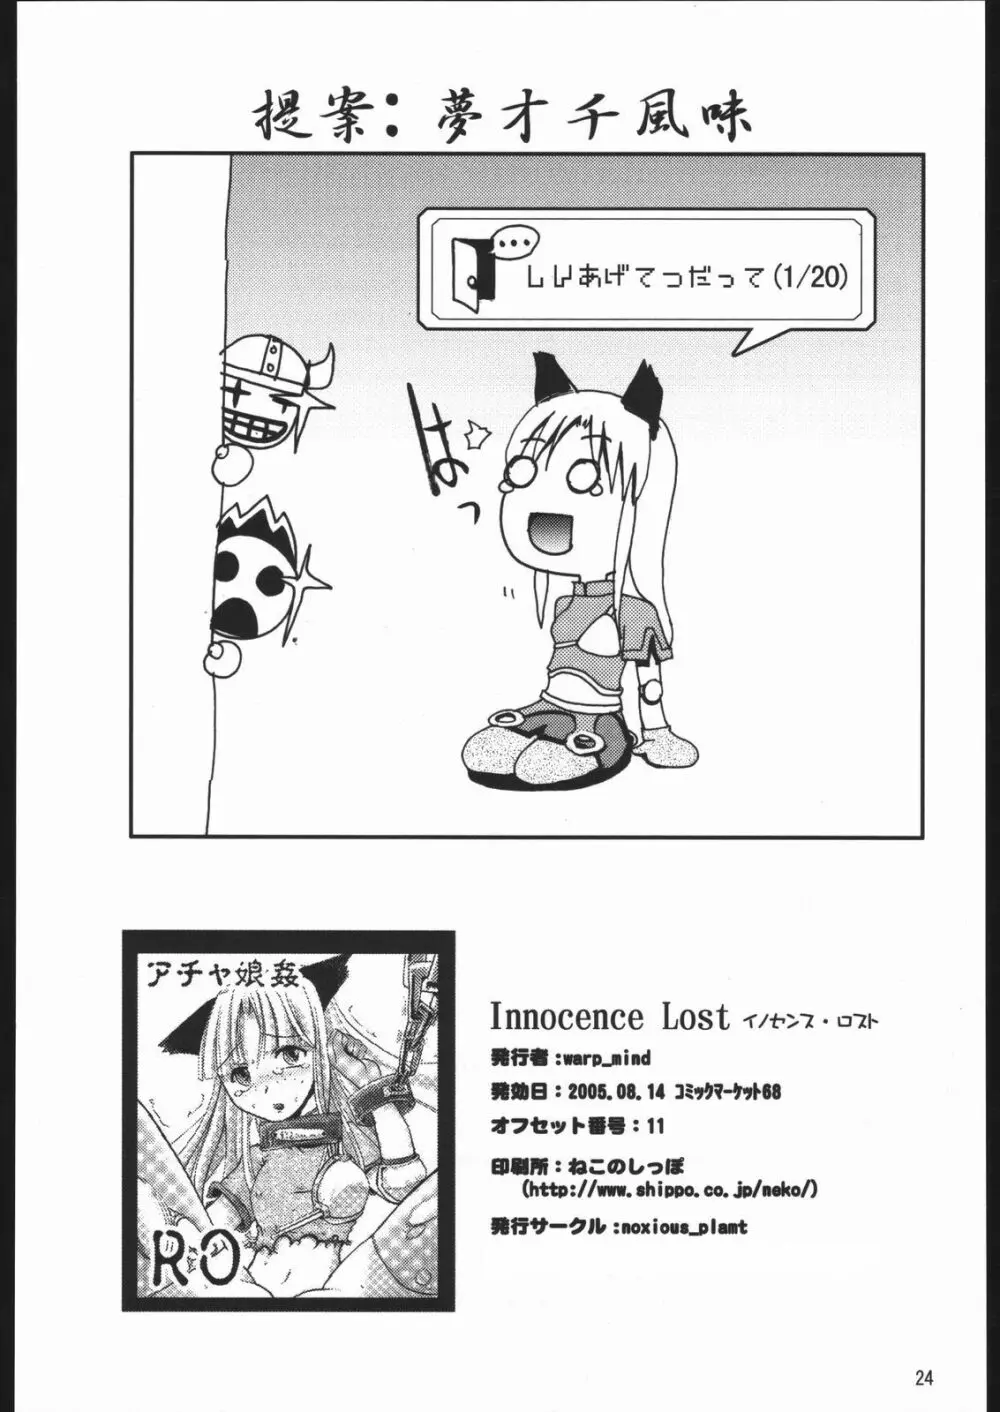 Innocence Lost Page.25